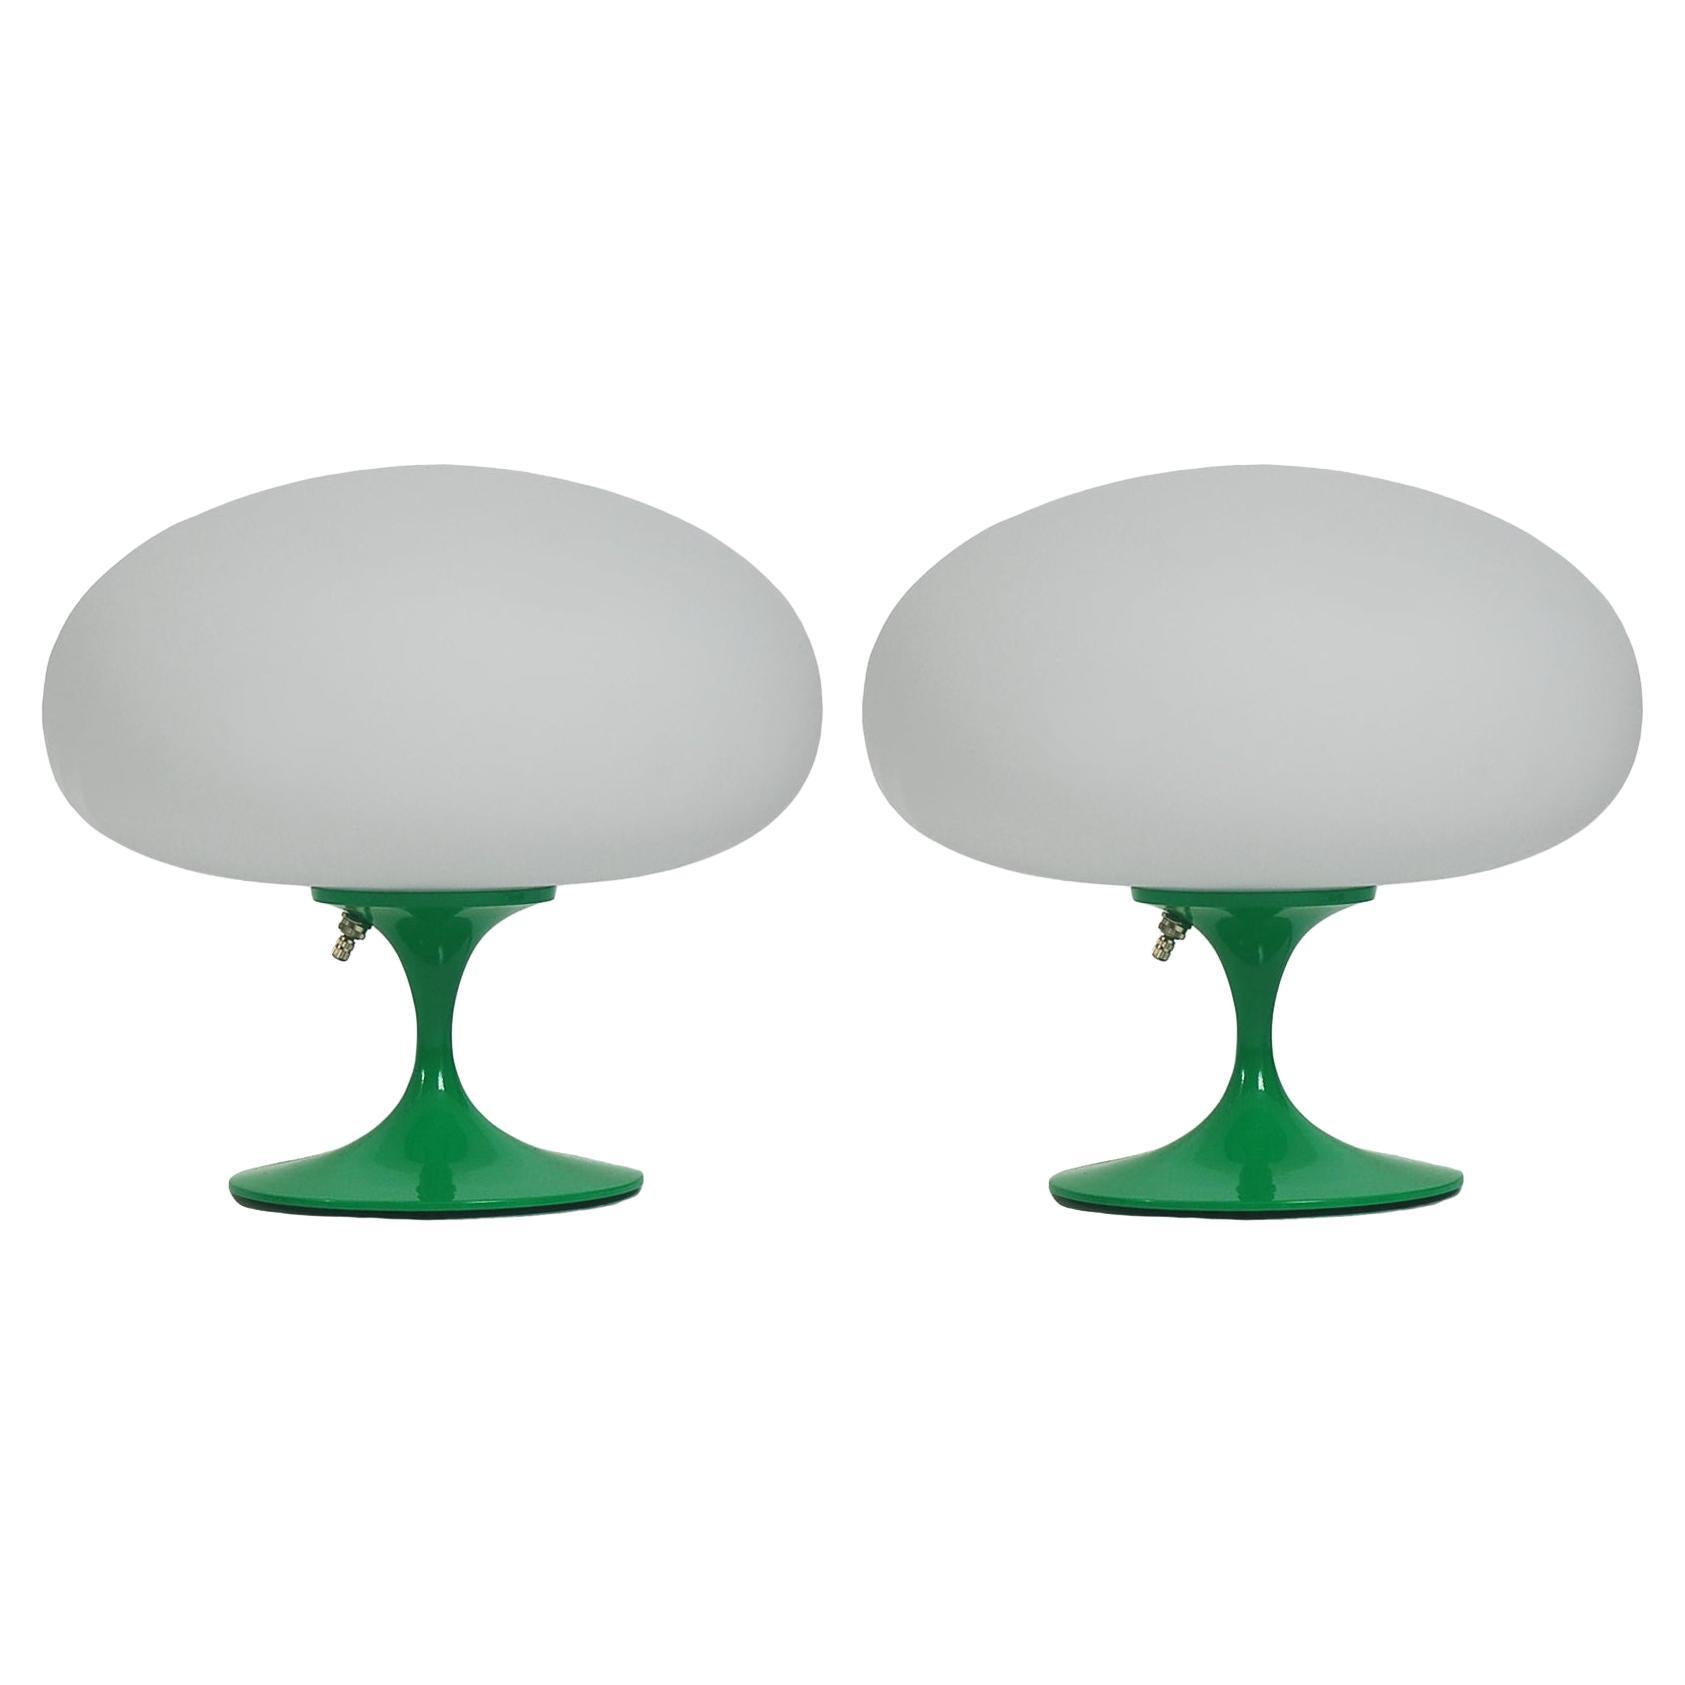 Pair of Mid-Century Tulip Table Lamps by Designline in Green with White Glass For Sale